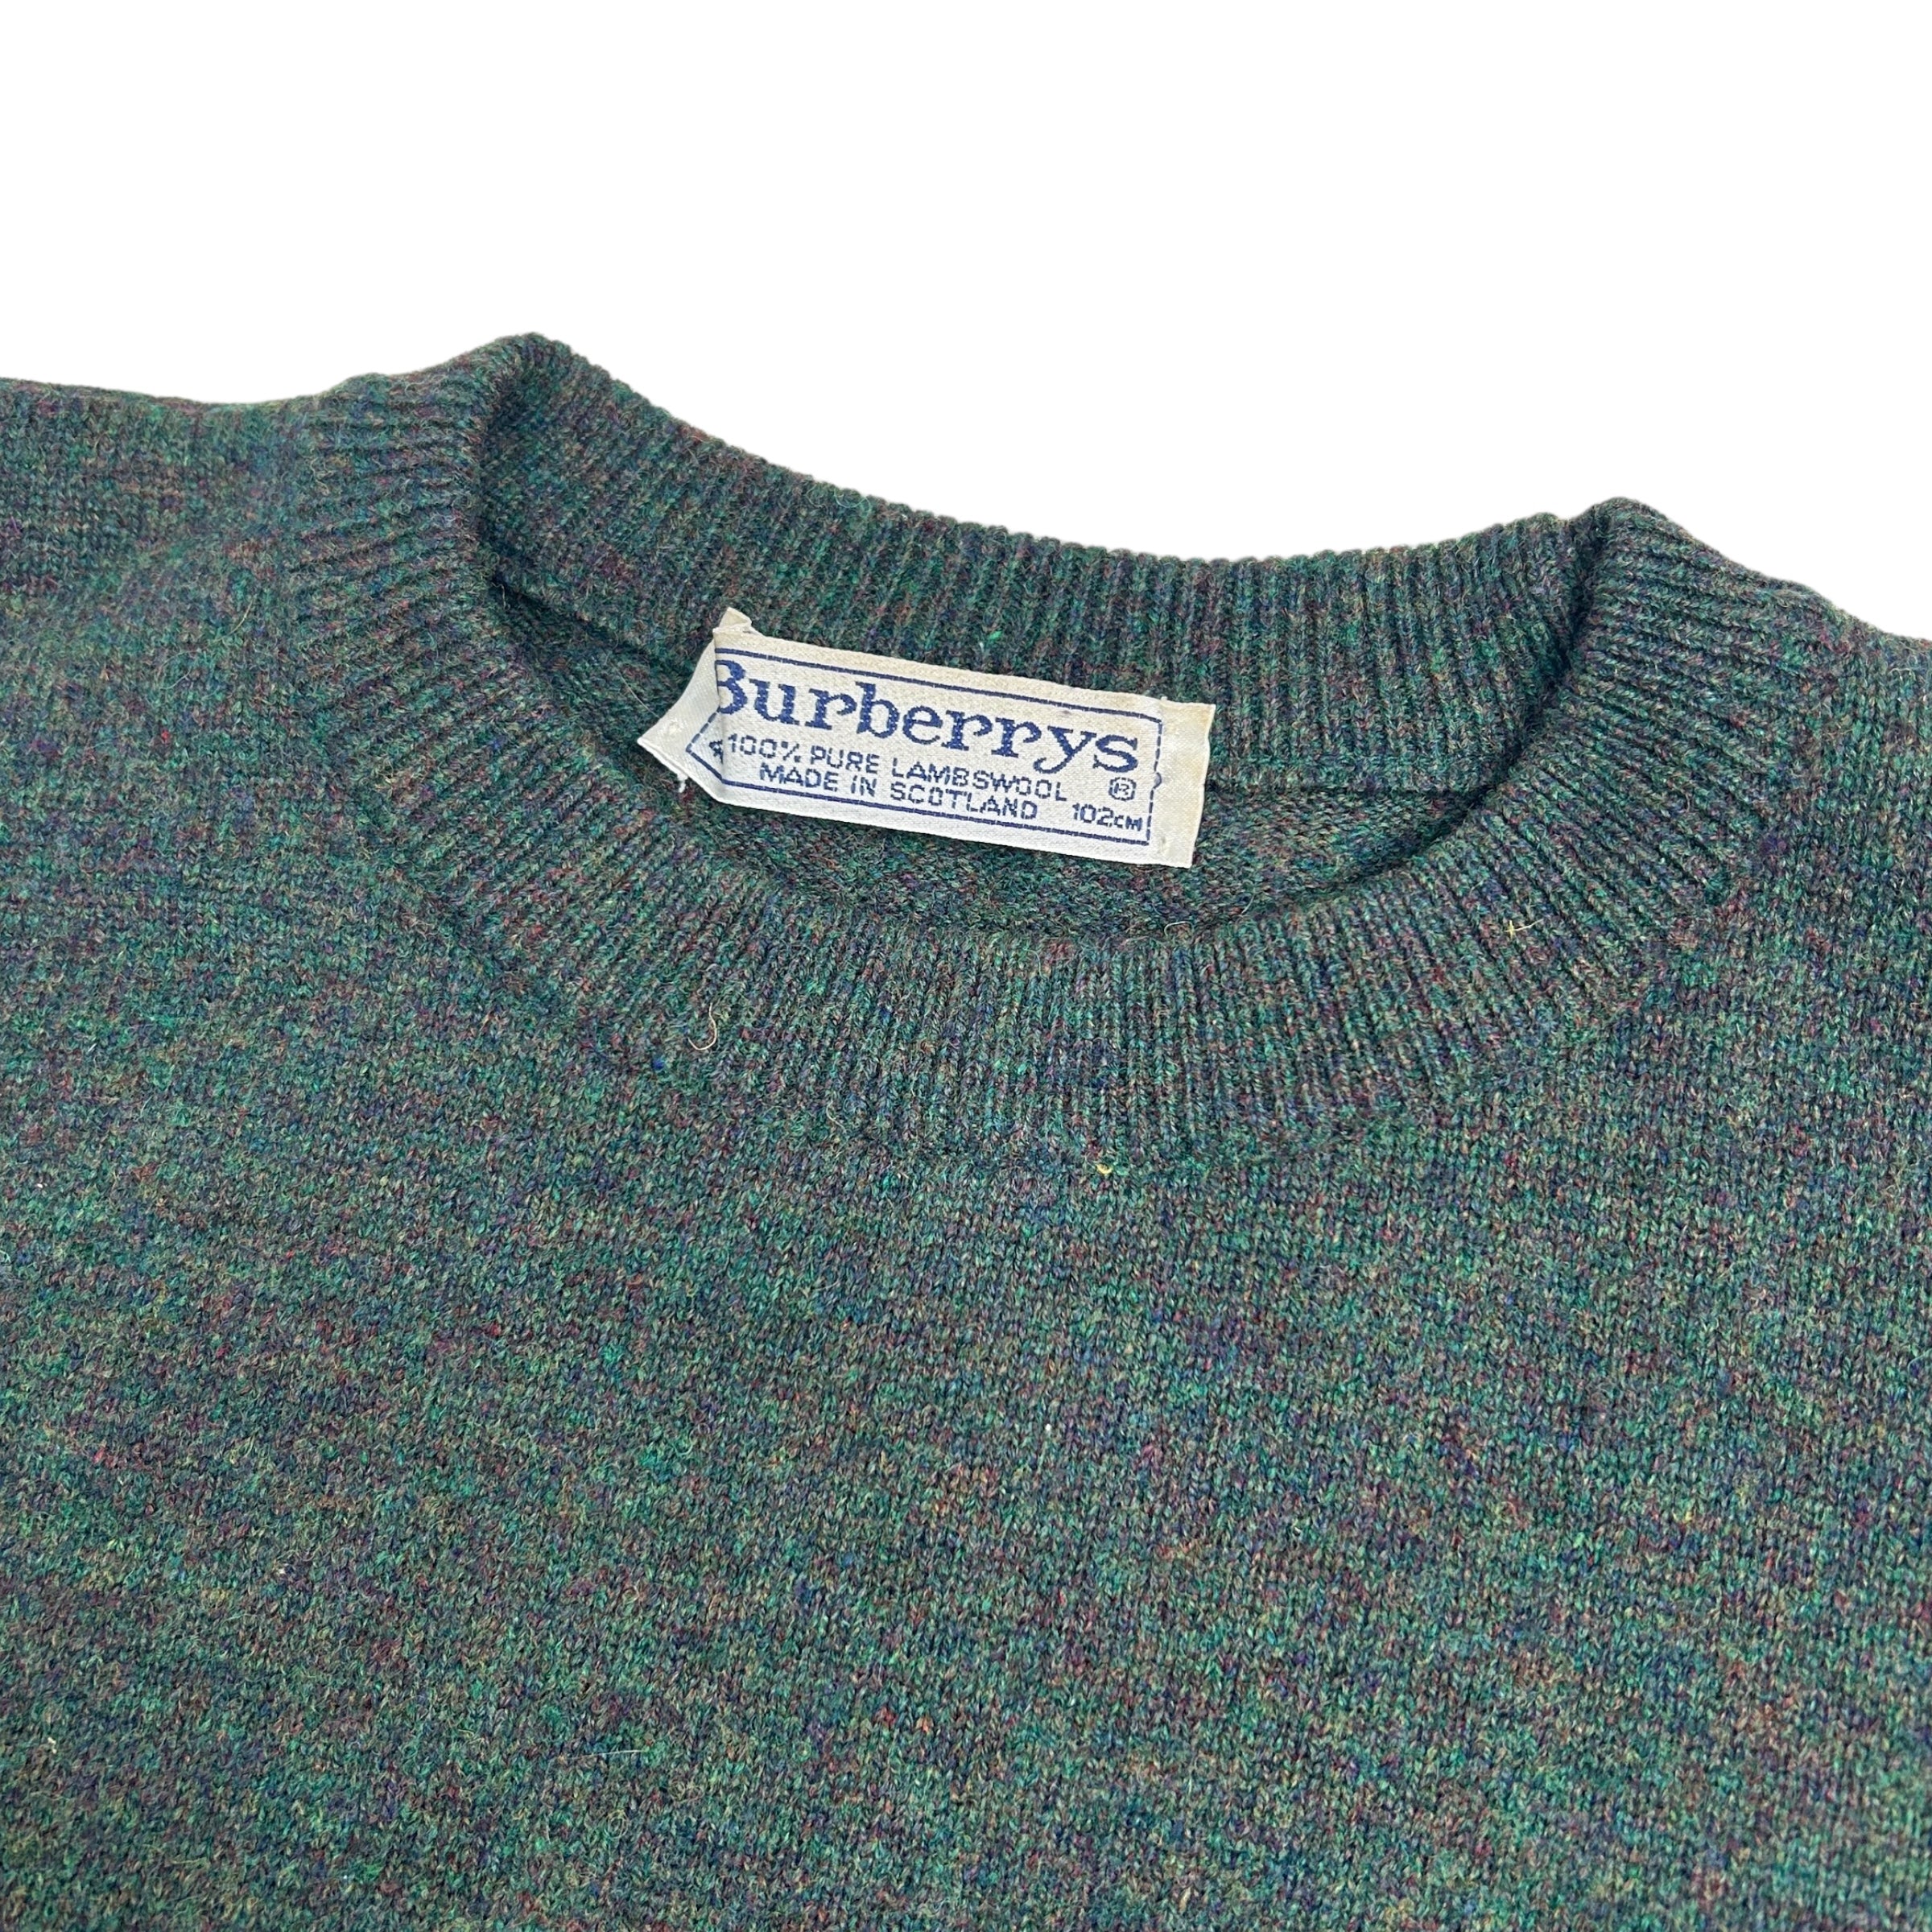 BURBERRY VINTAGE LAMBSWOOL KNIT SWEATER